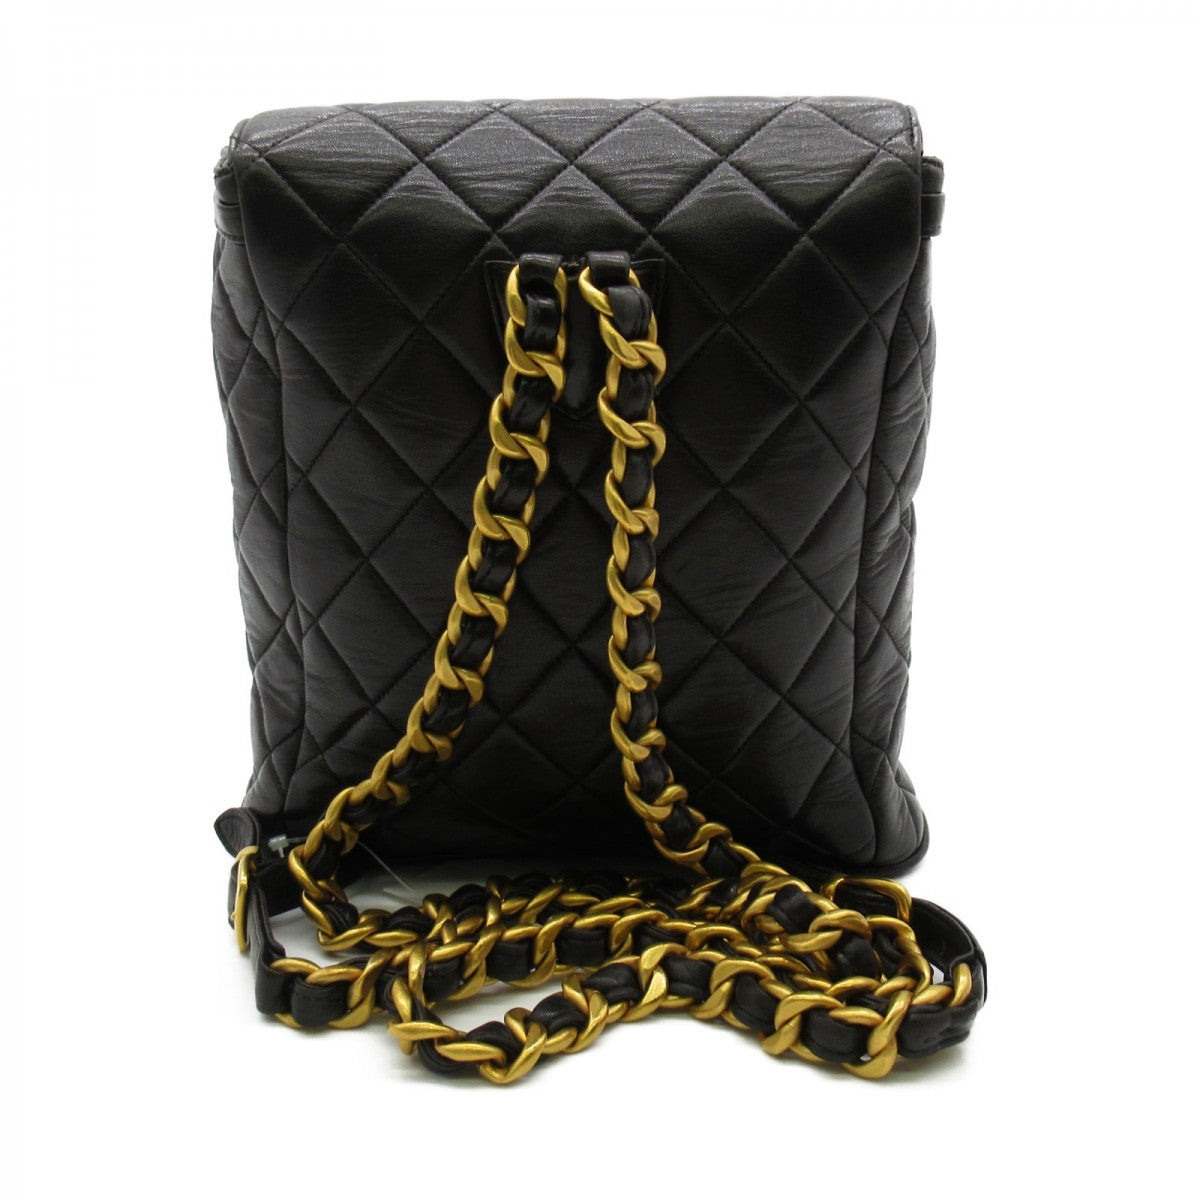 CC Quilted Leather Duma Backpack